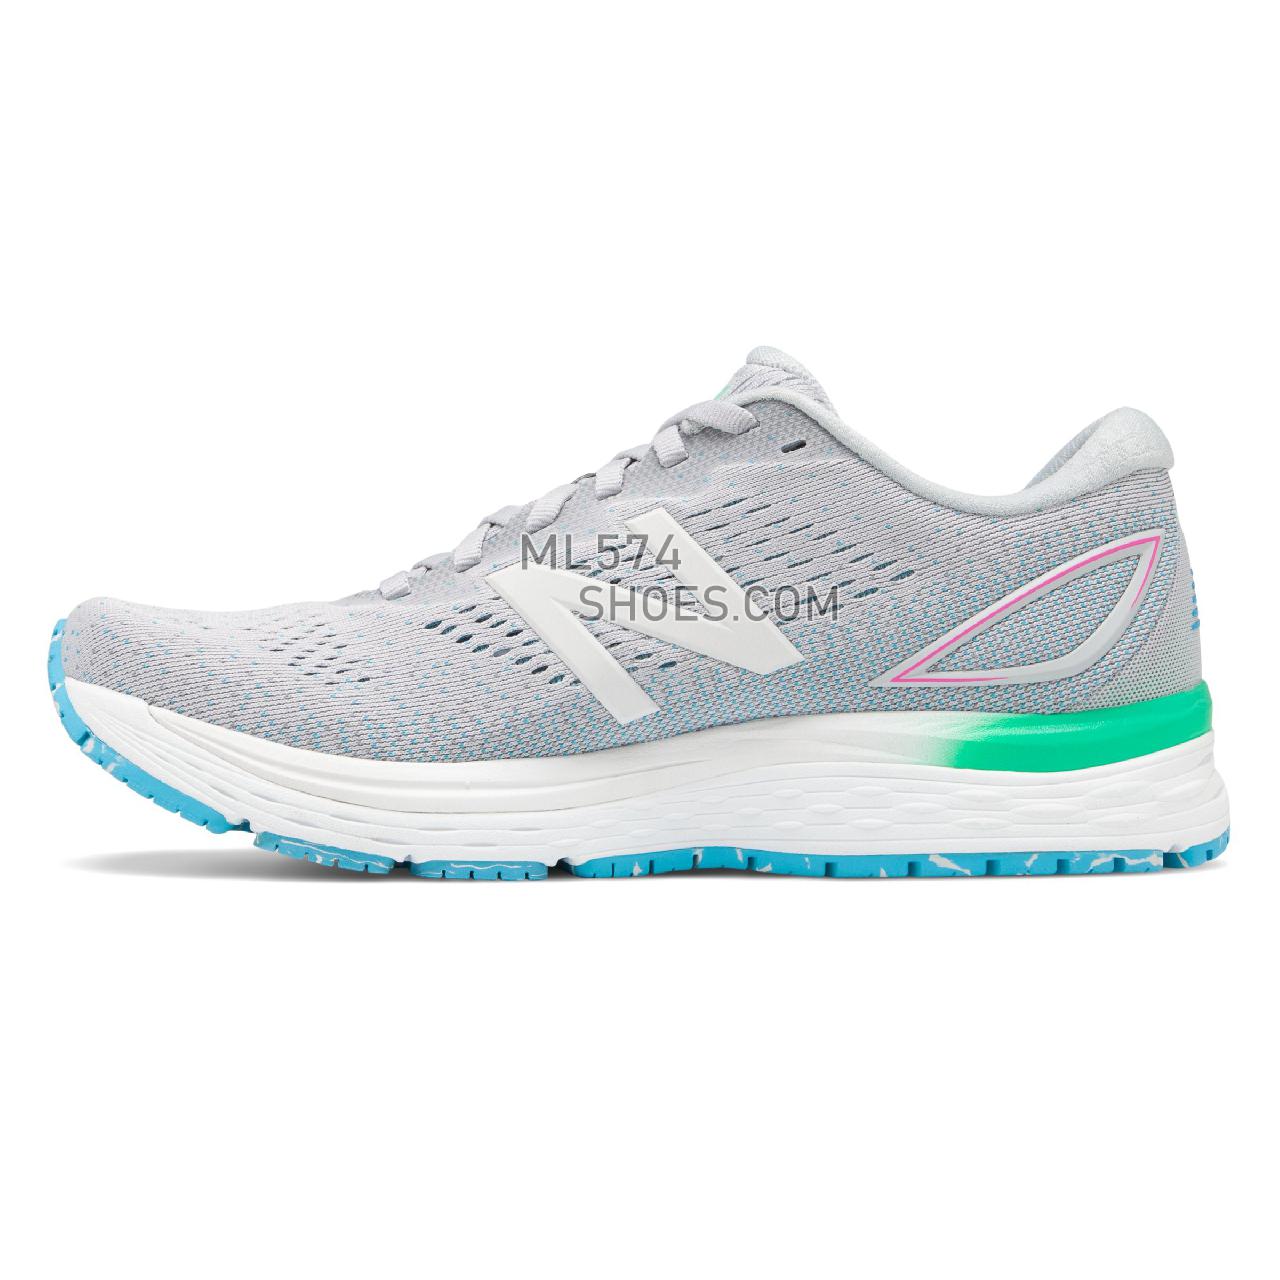 New Balance 880v9 - Women's Neutral Running - Light Aluminum with Steel and Bayside - W880PP9